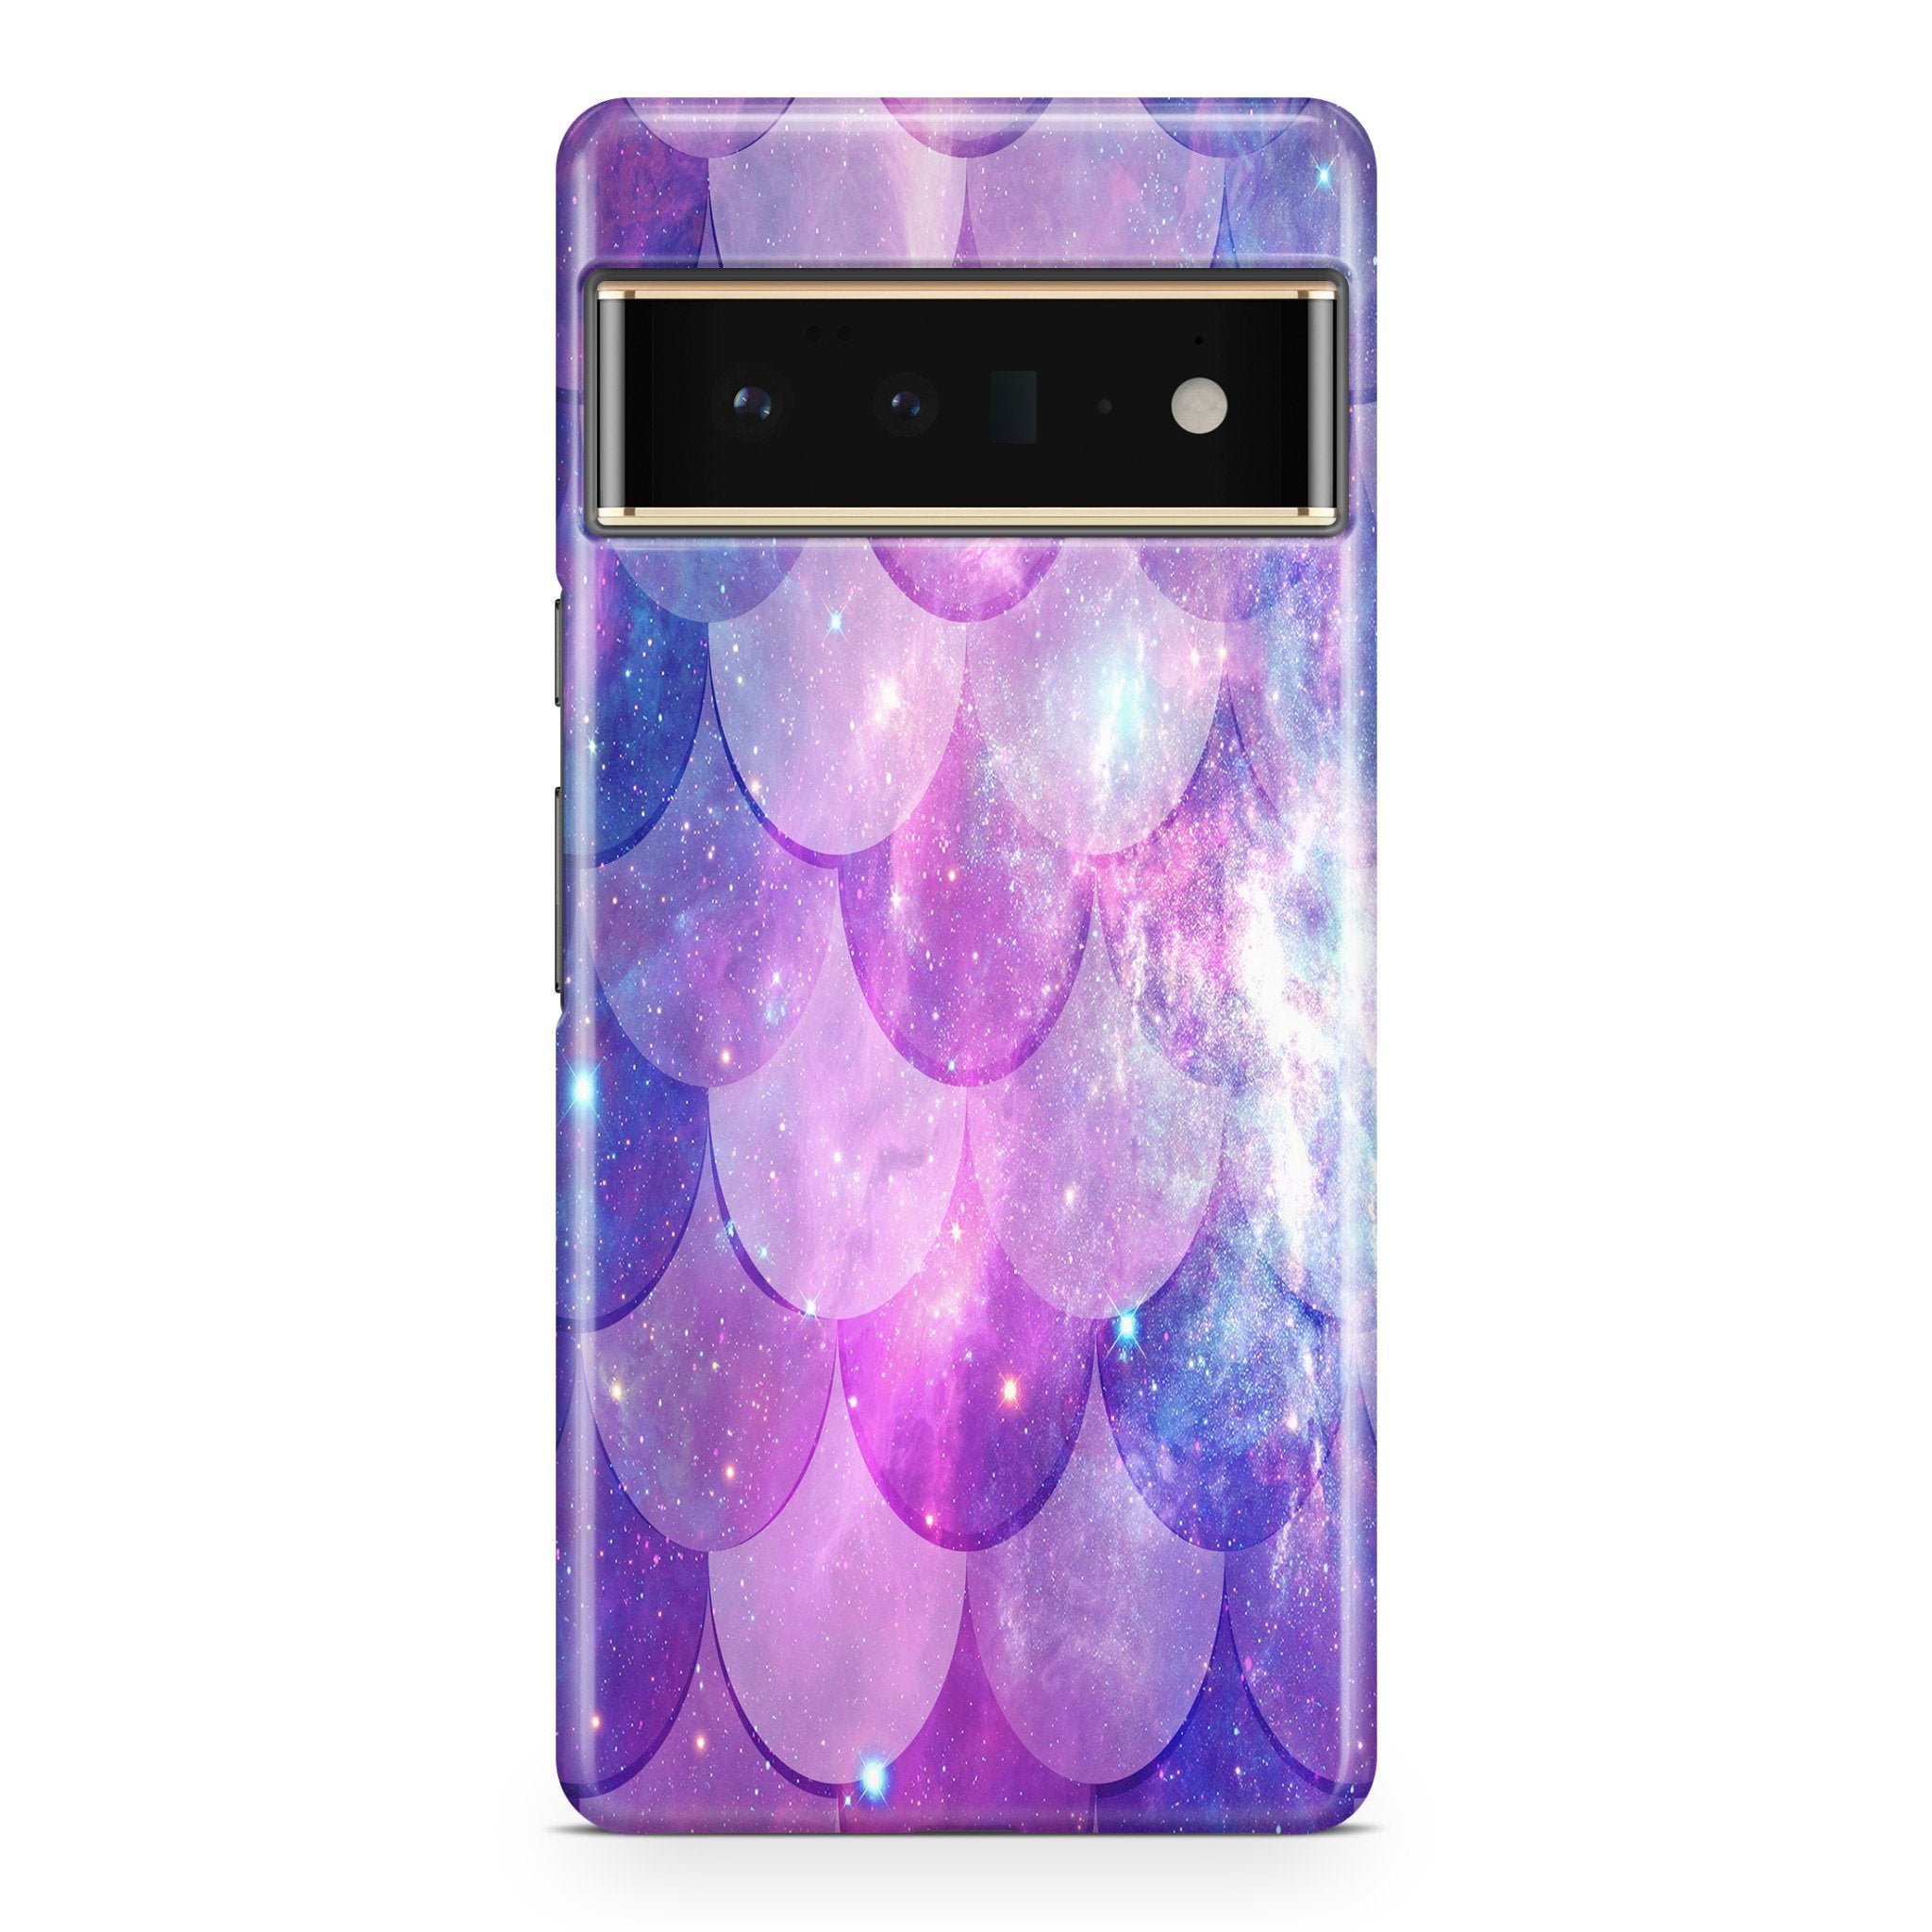 Purple Space Mermaid Scale - Google phone case designs by CaseSwagger